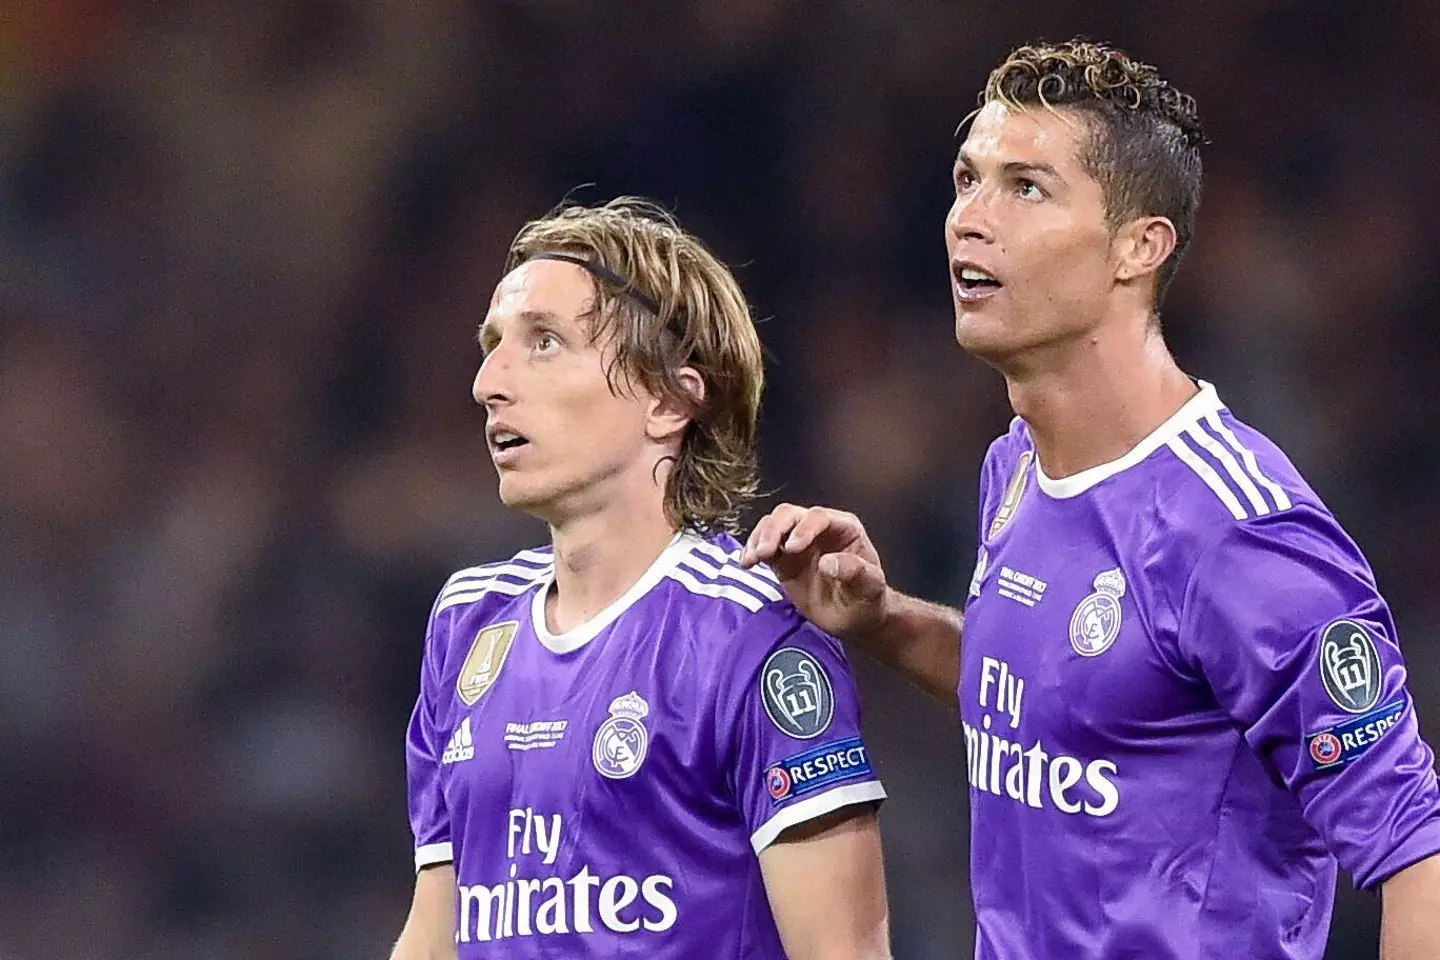 Modric has reportedly turned down the opportunity to link up with former teammate Cristiano Ronaldo in Saudi Arabia. (Image